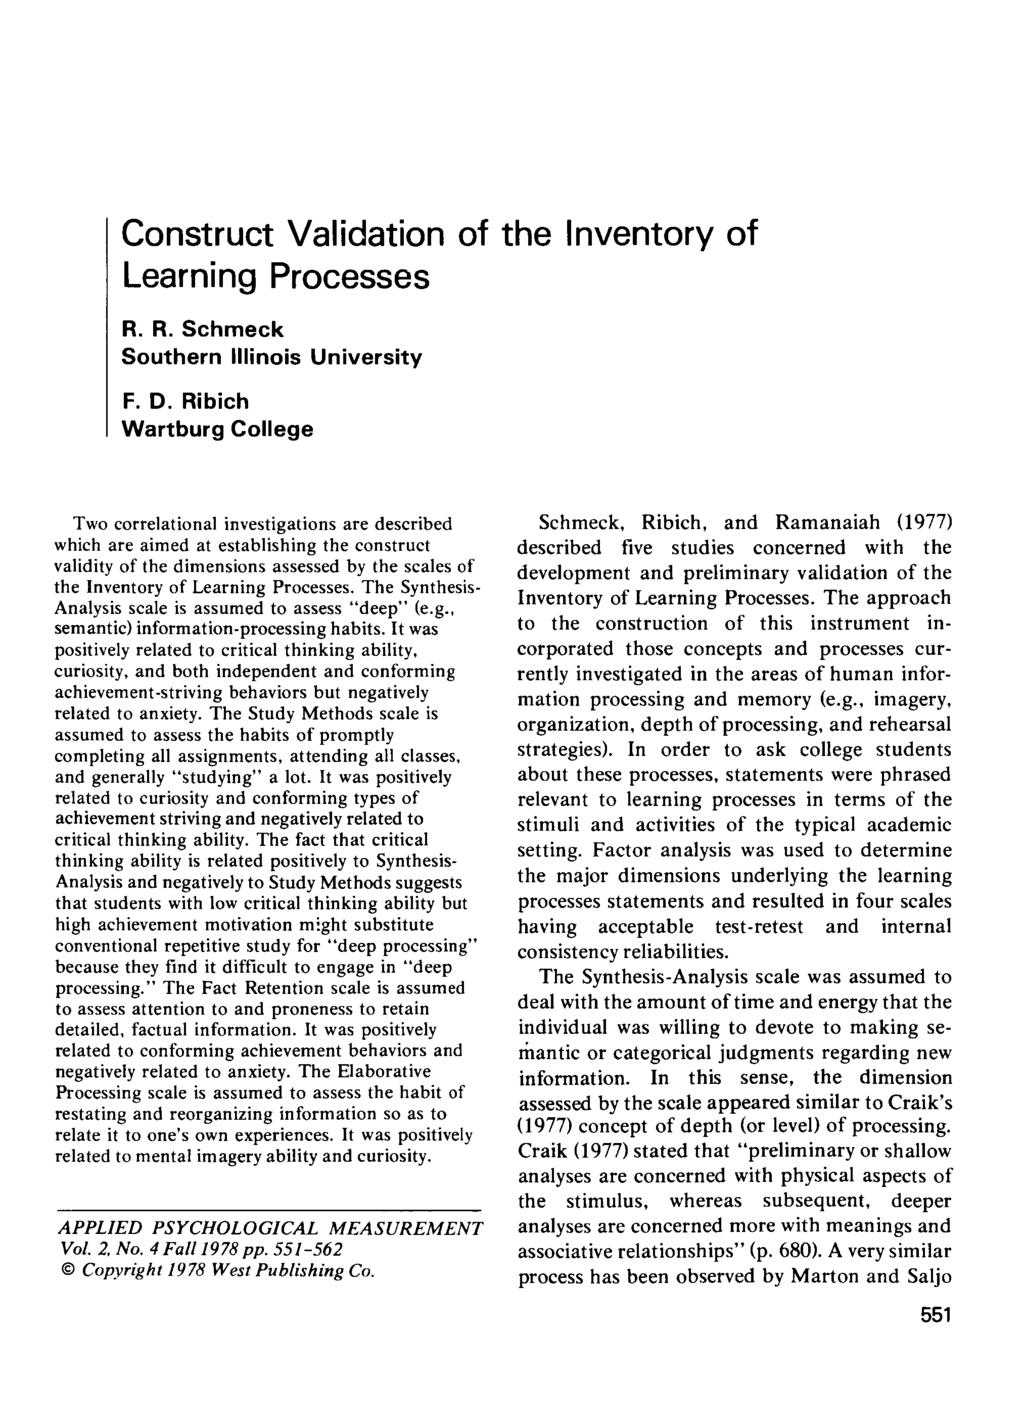 Construct Validation of the Inventory of Learning Processes R. R. Schmeck Southern Illinois University F. D.